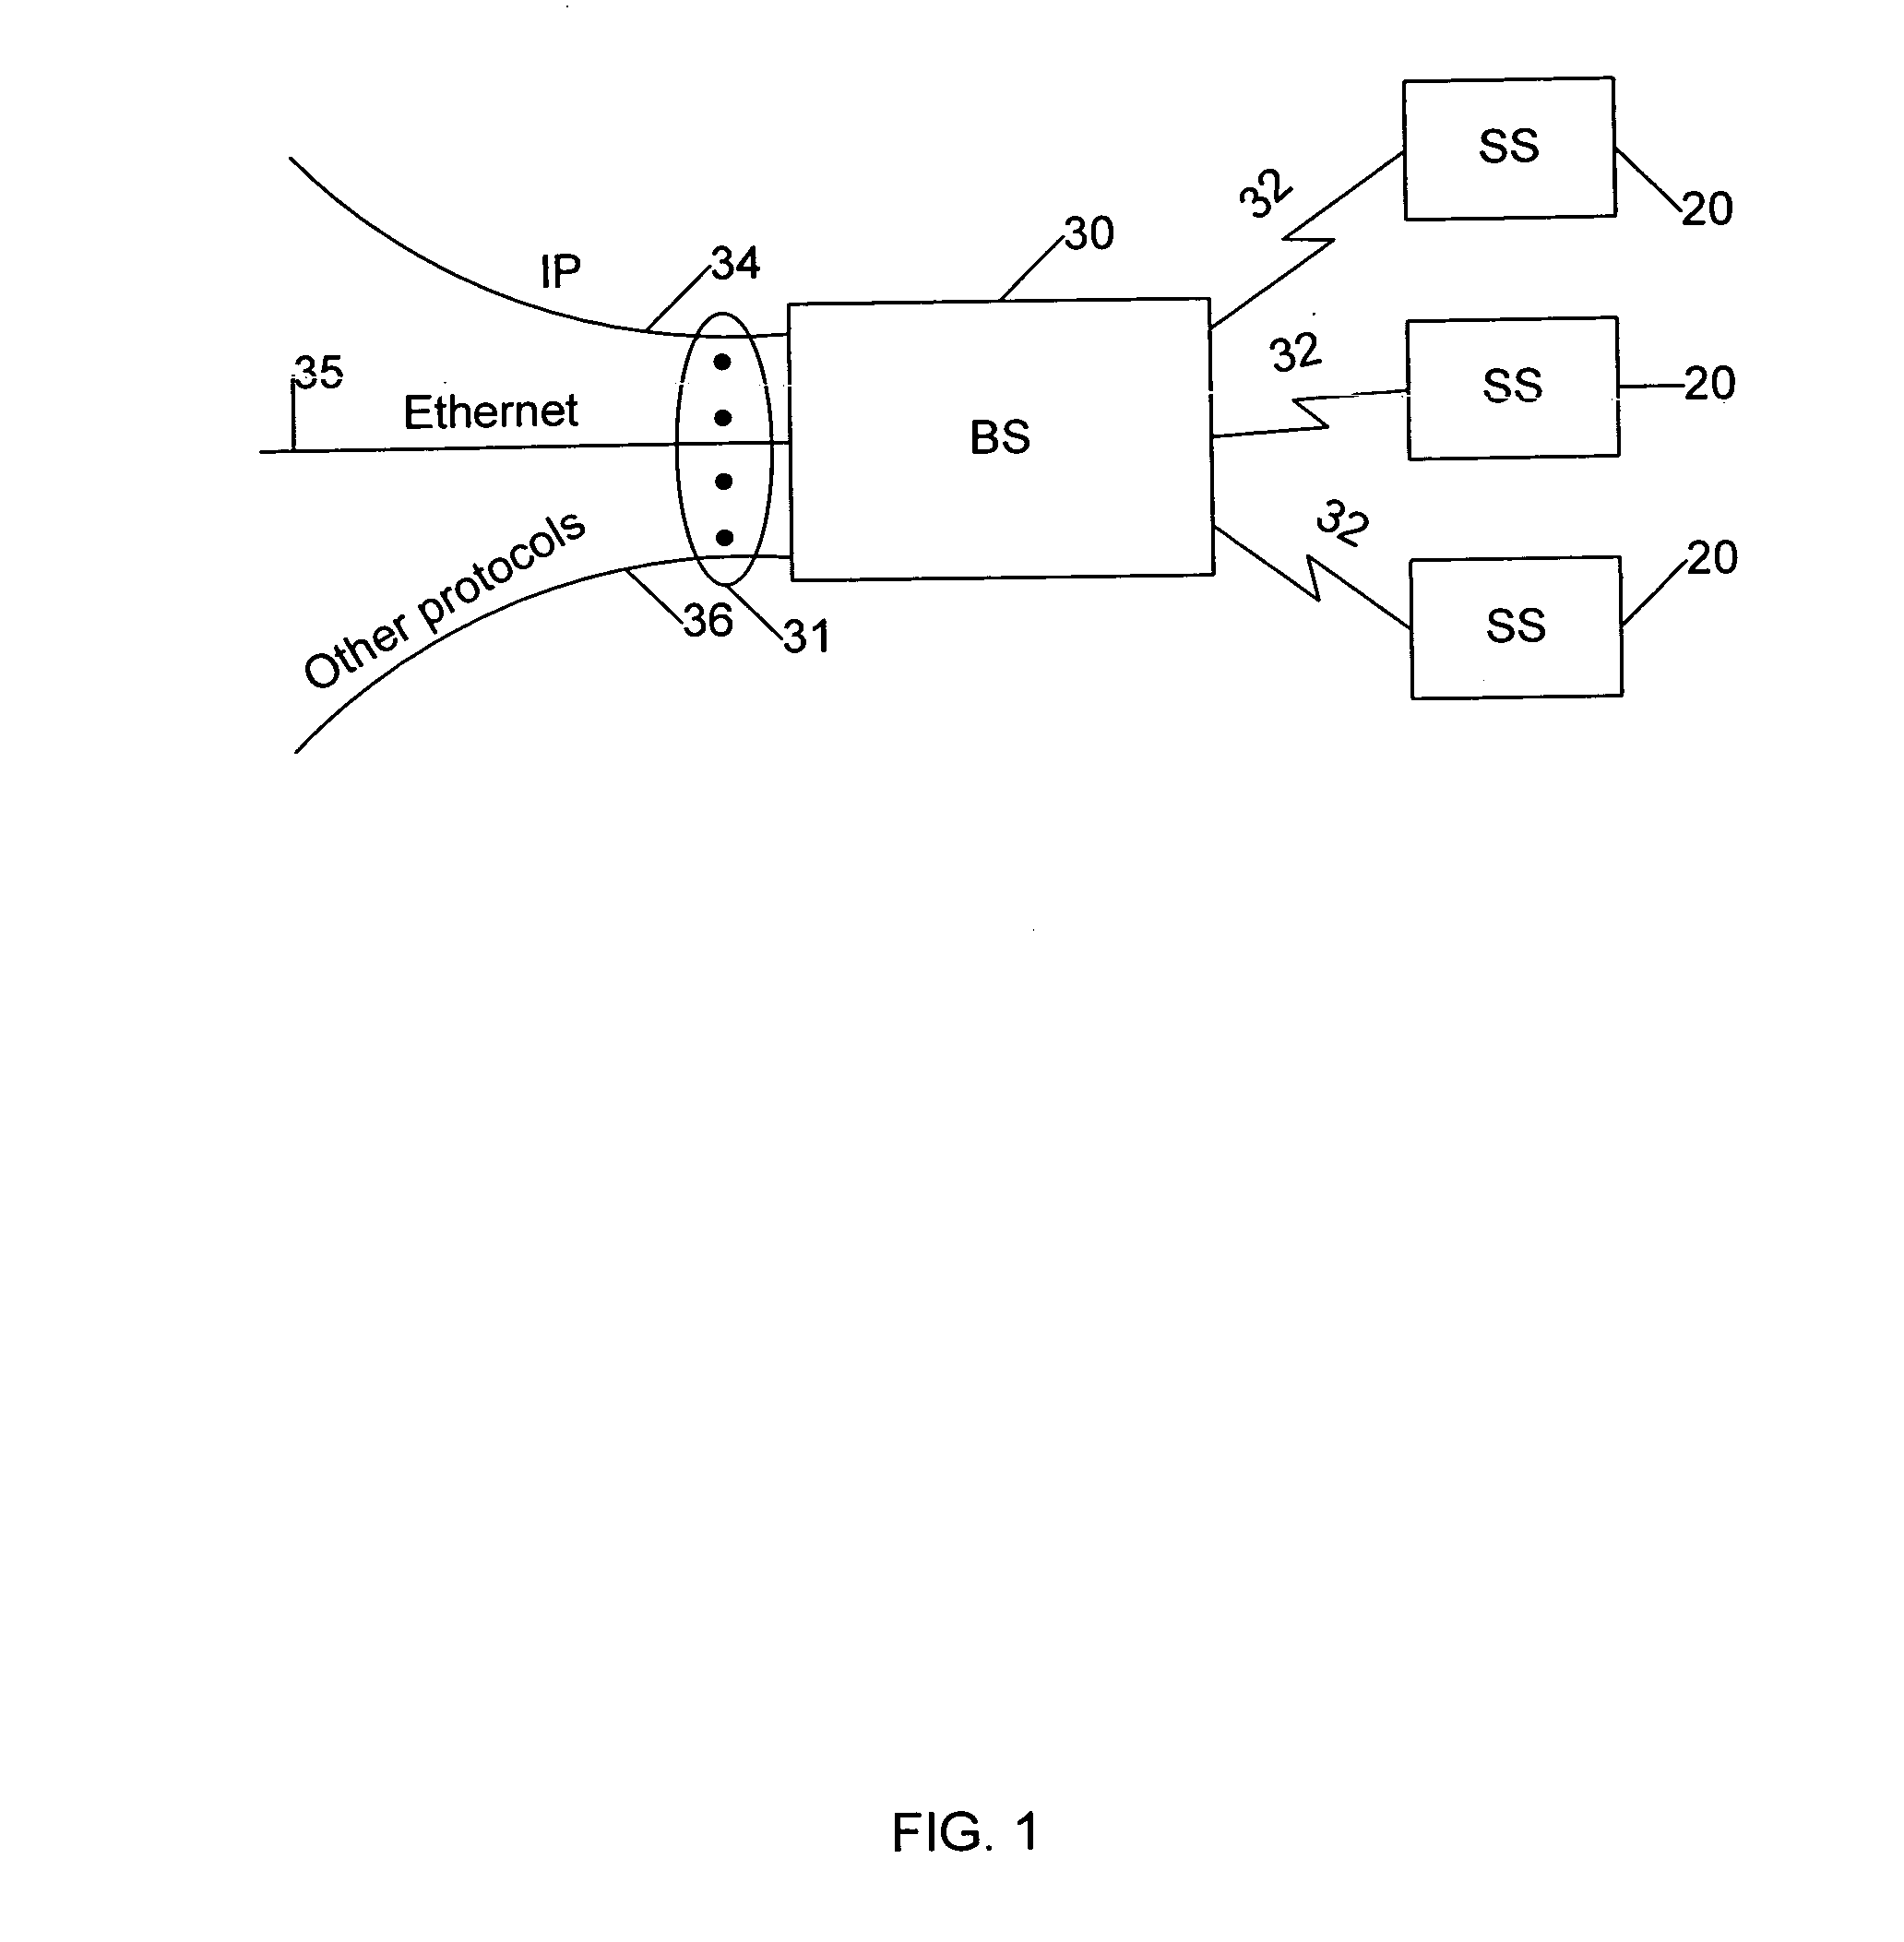 Method and system for generic multiprotocol convergence over wireless air interface